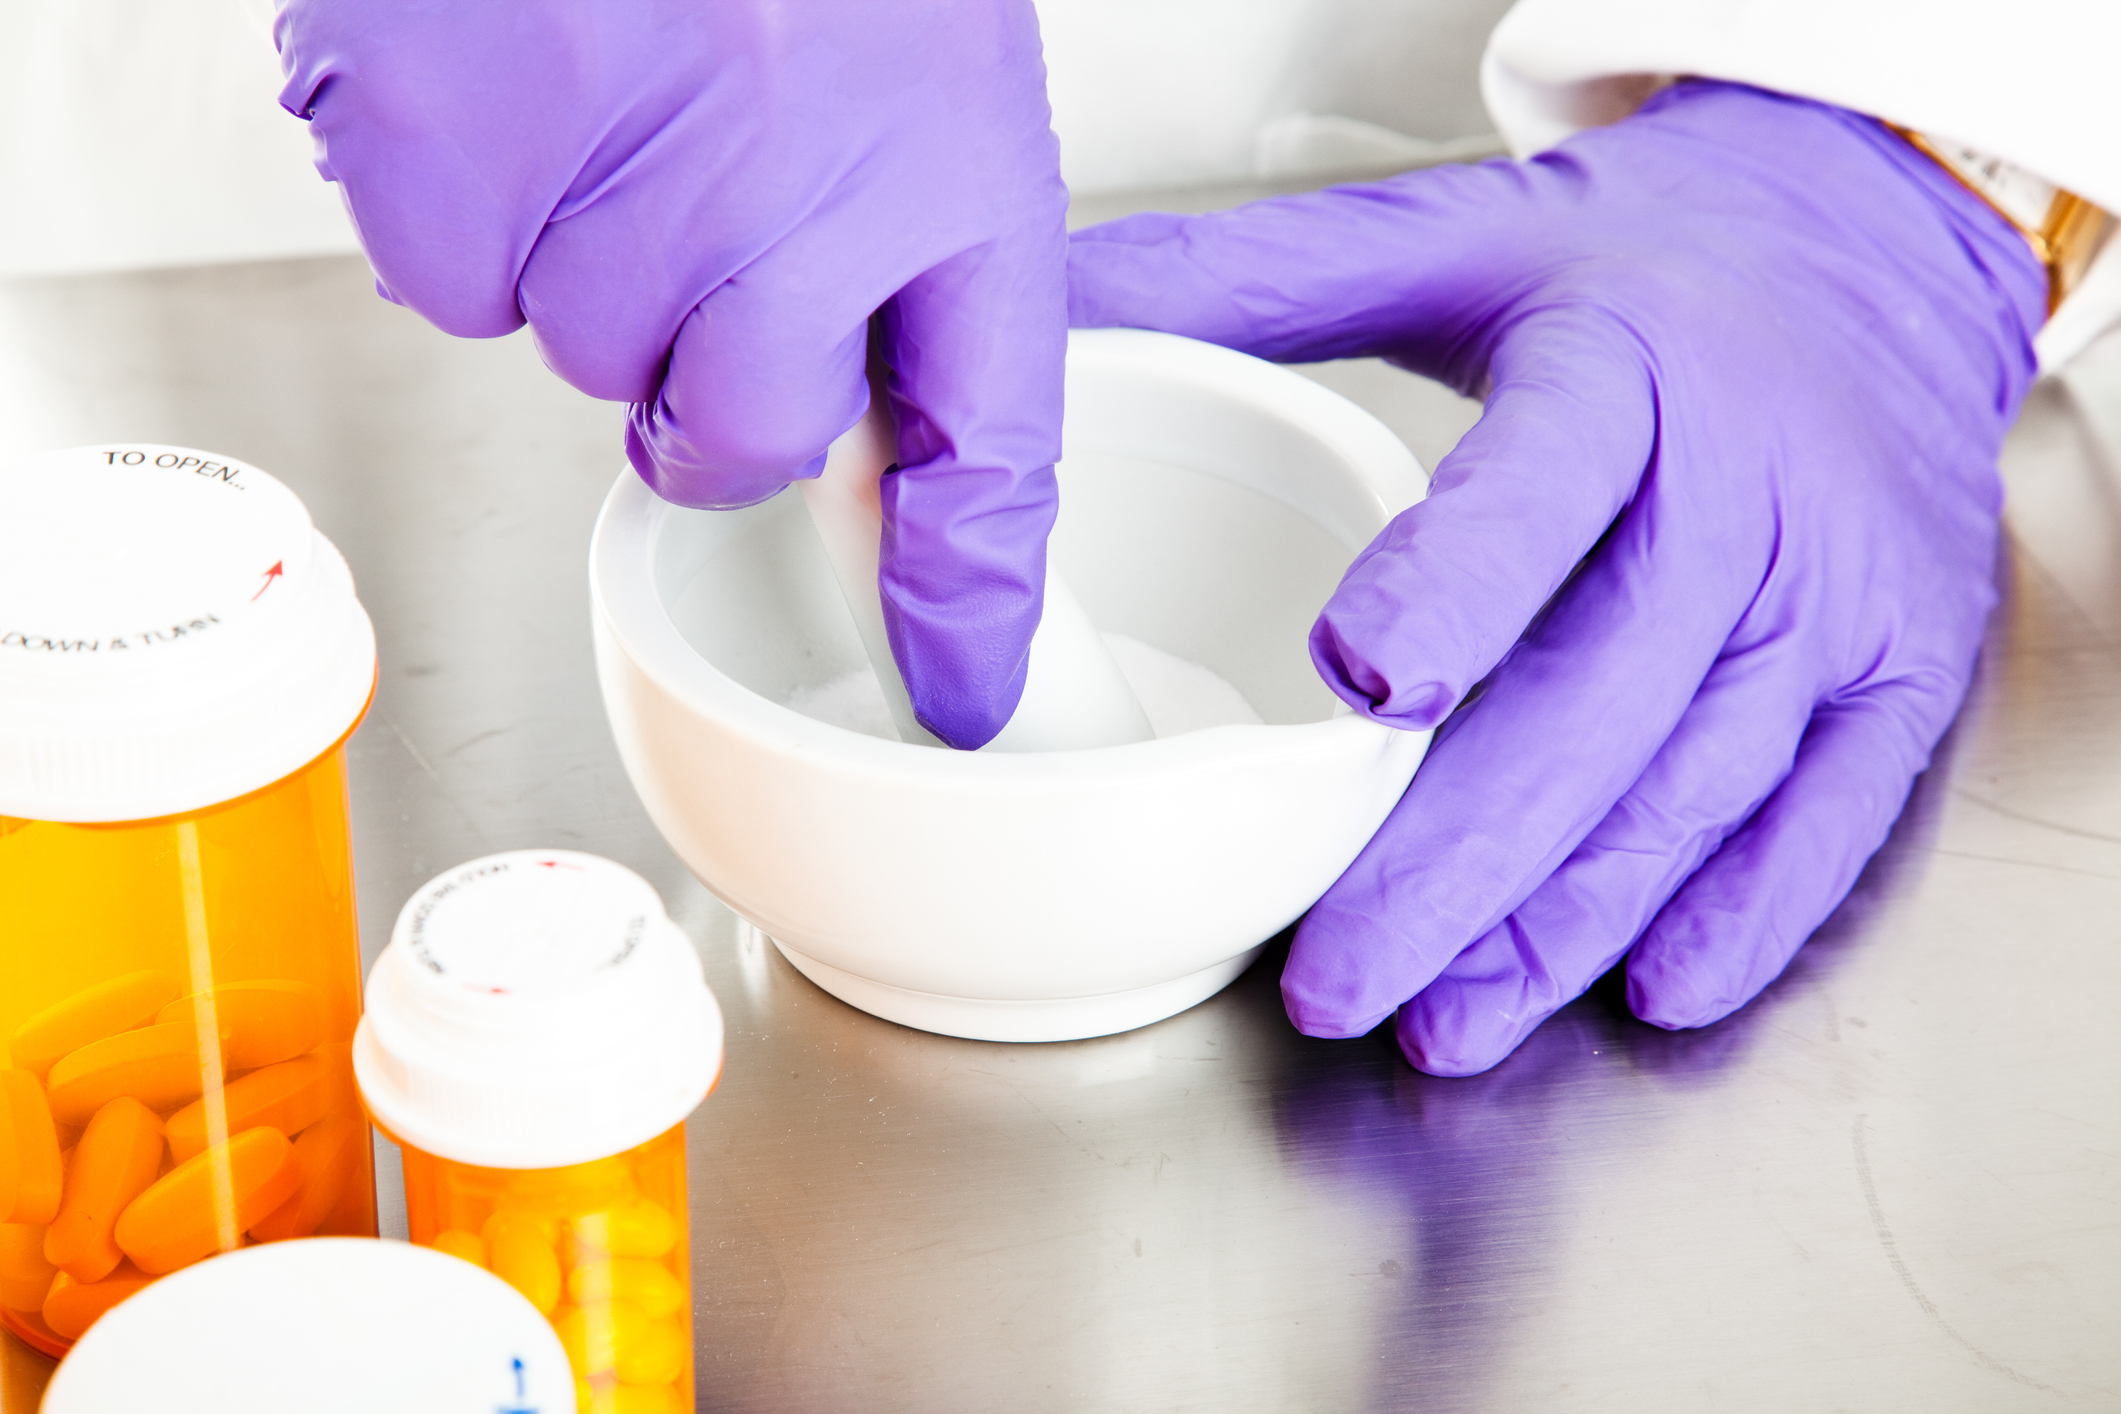 Proposed Ruling by FDA Potentially Blocks Access to Ingredients Used in Compounded Medications